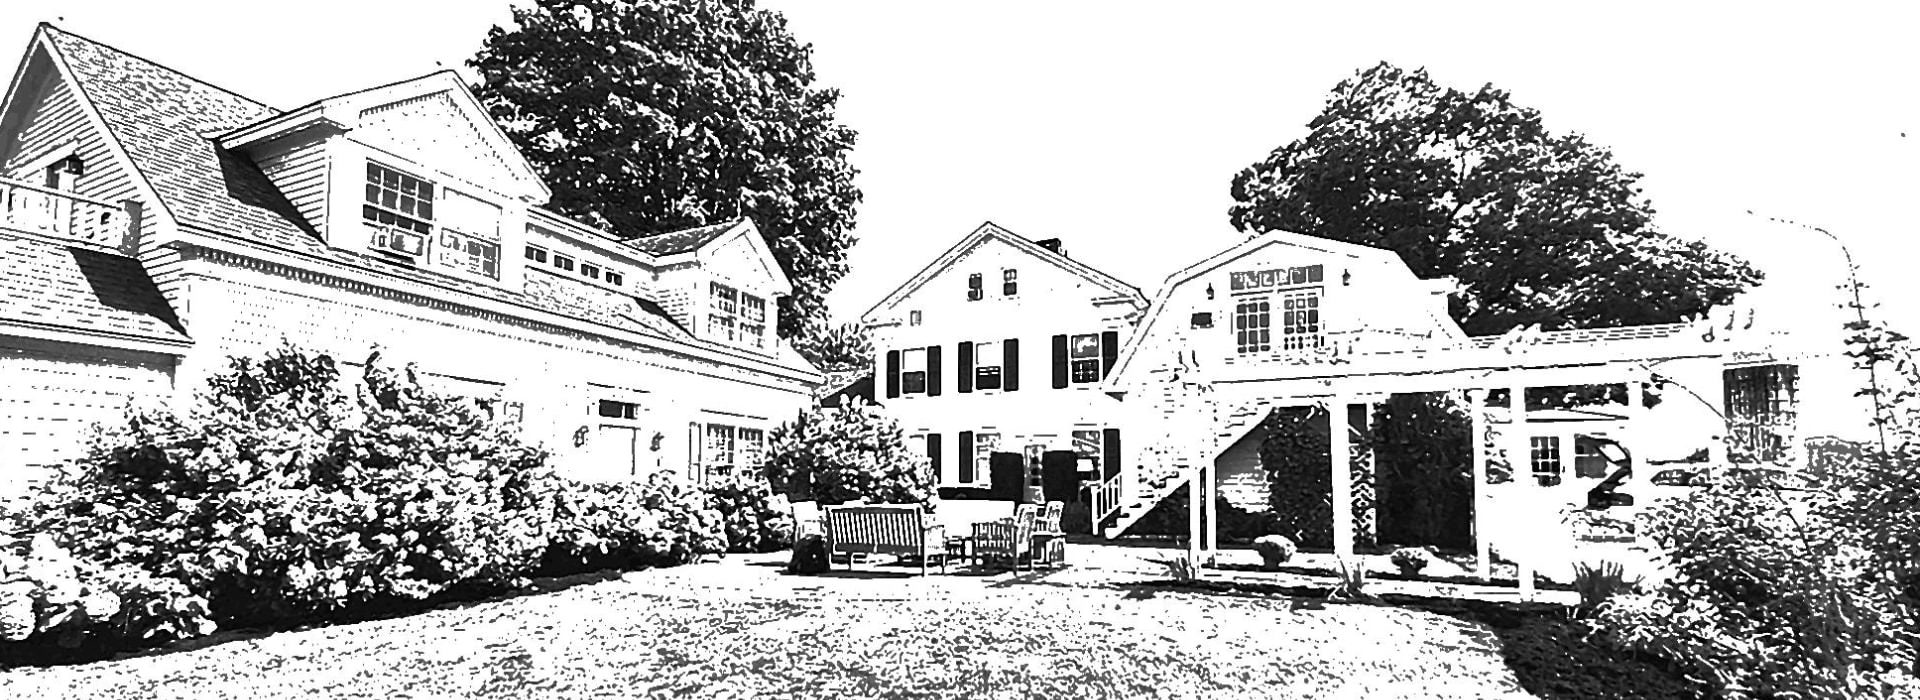 Black and white sketch of a large house with a carriage house, covered walkway and outdoor seating area.